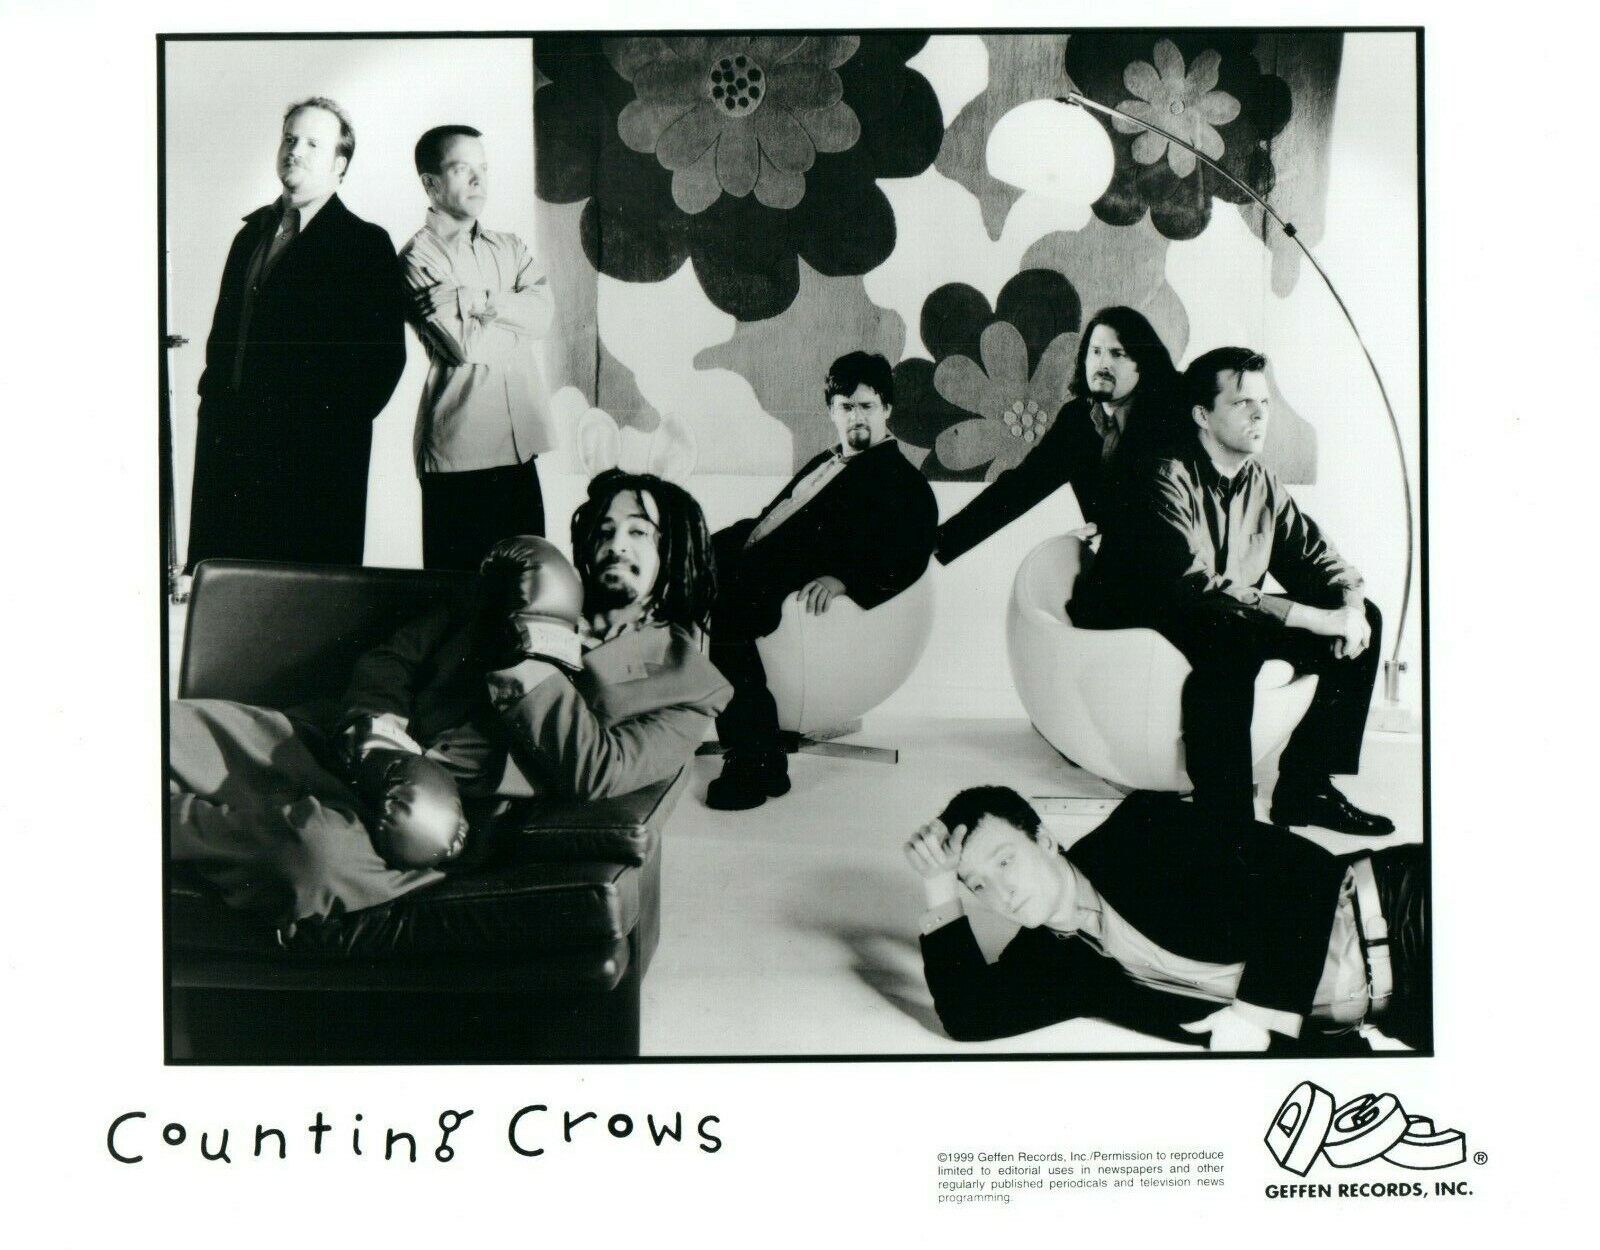 COUNTING CROWS Pop Rock Music Band 8x10 Promo Press Photo Poster painting Geffen Records